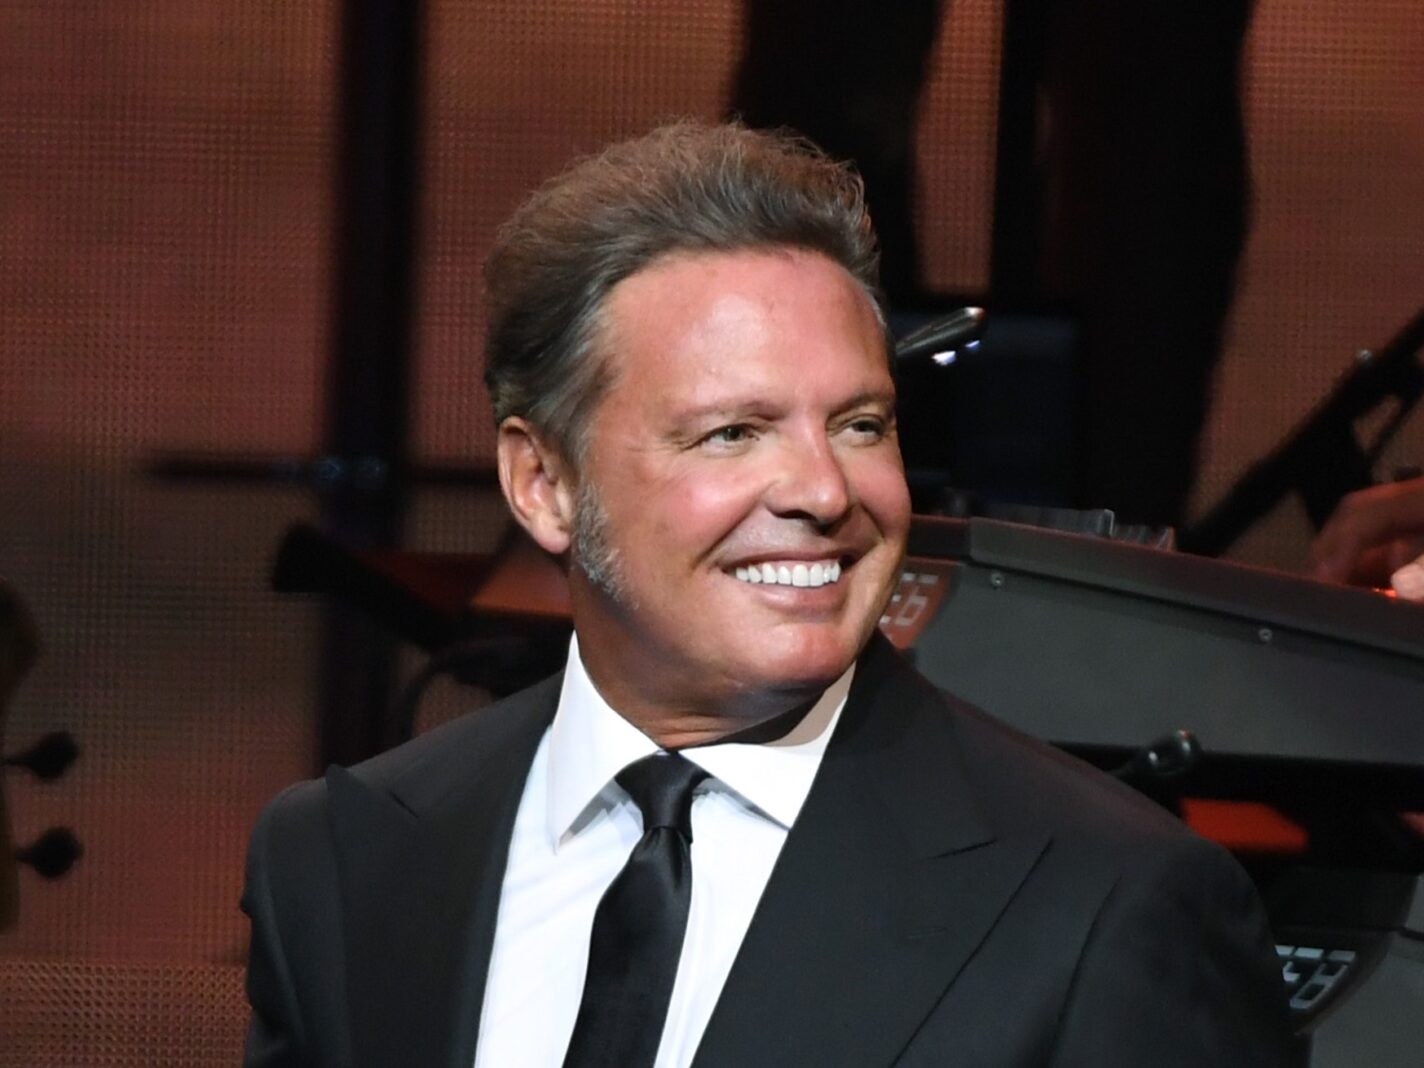 Luis Miguel Has the Internet Buzzing After New Photo Surfaces Online